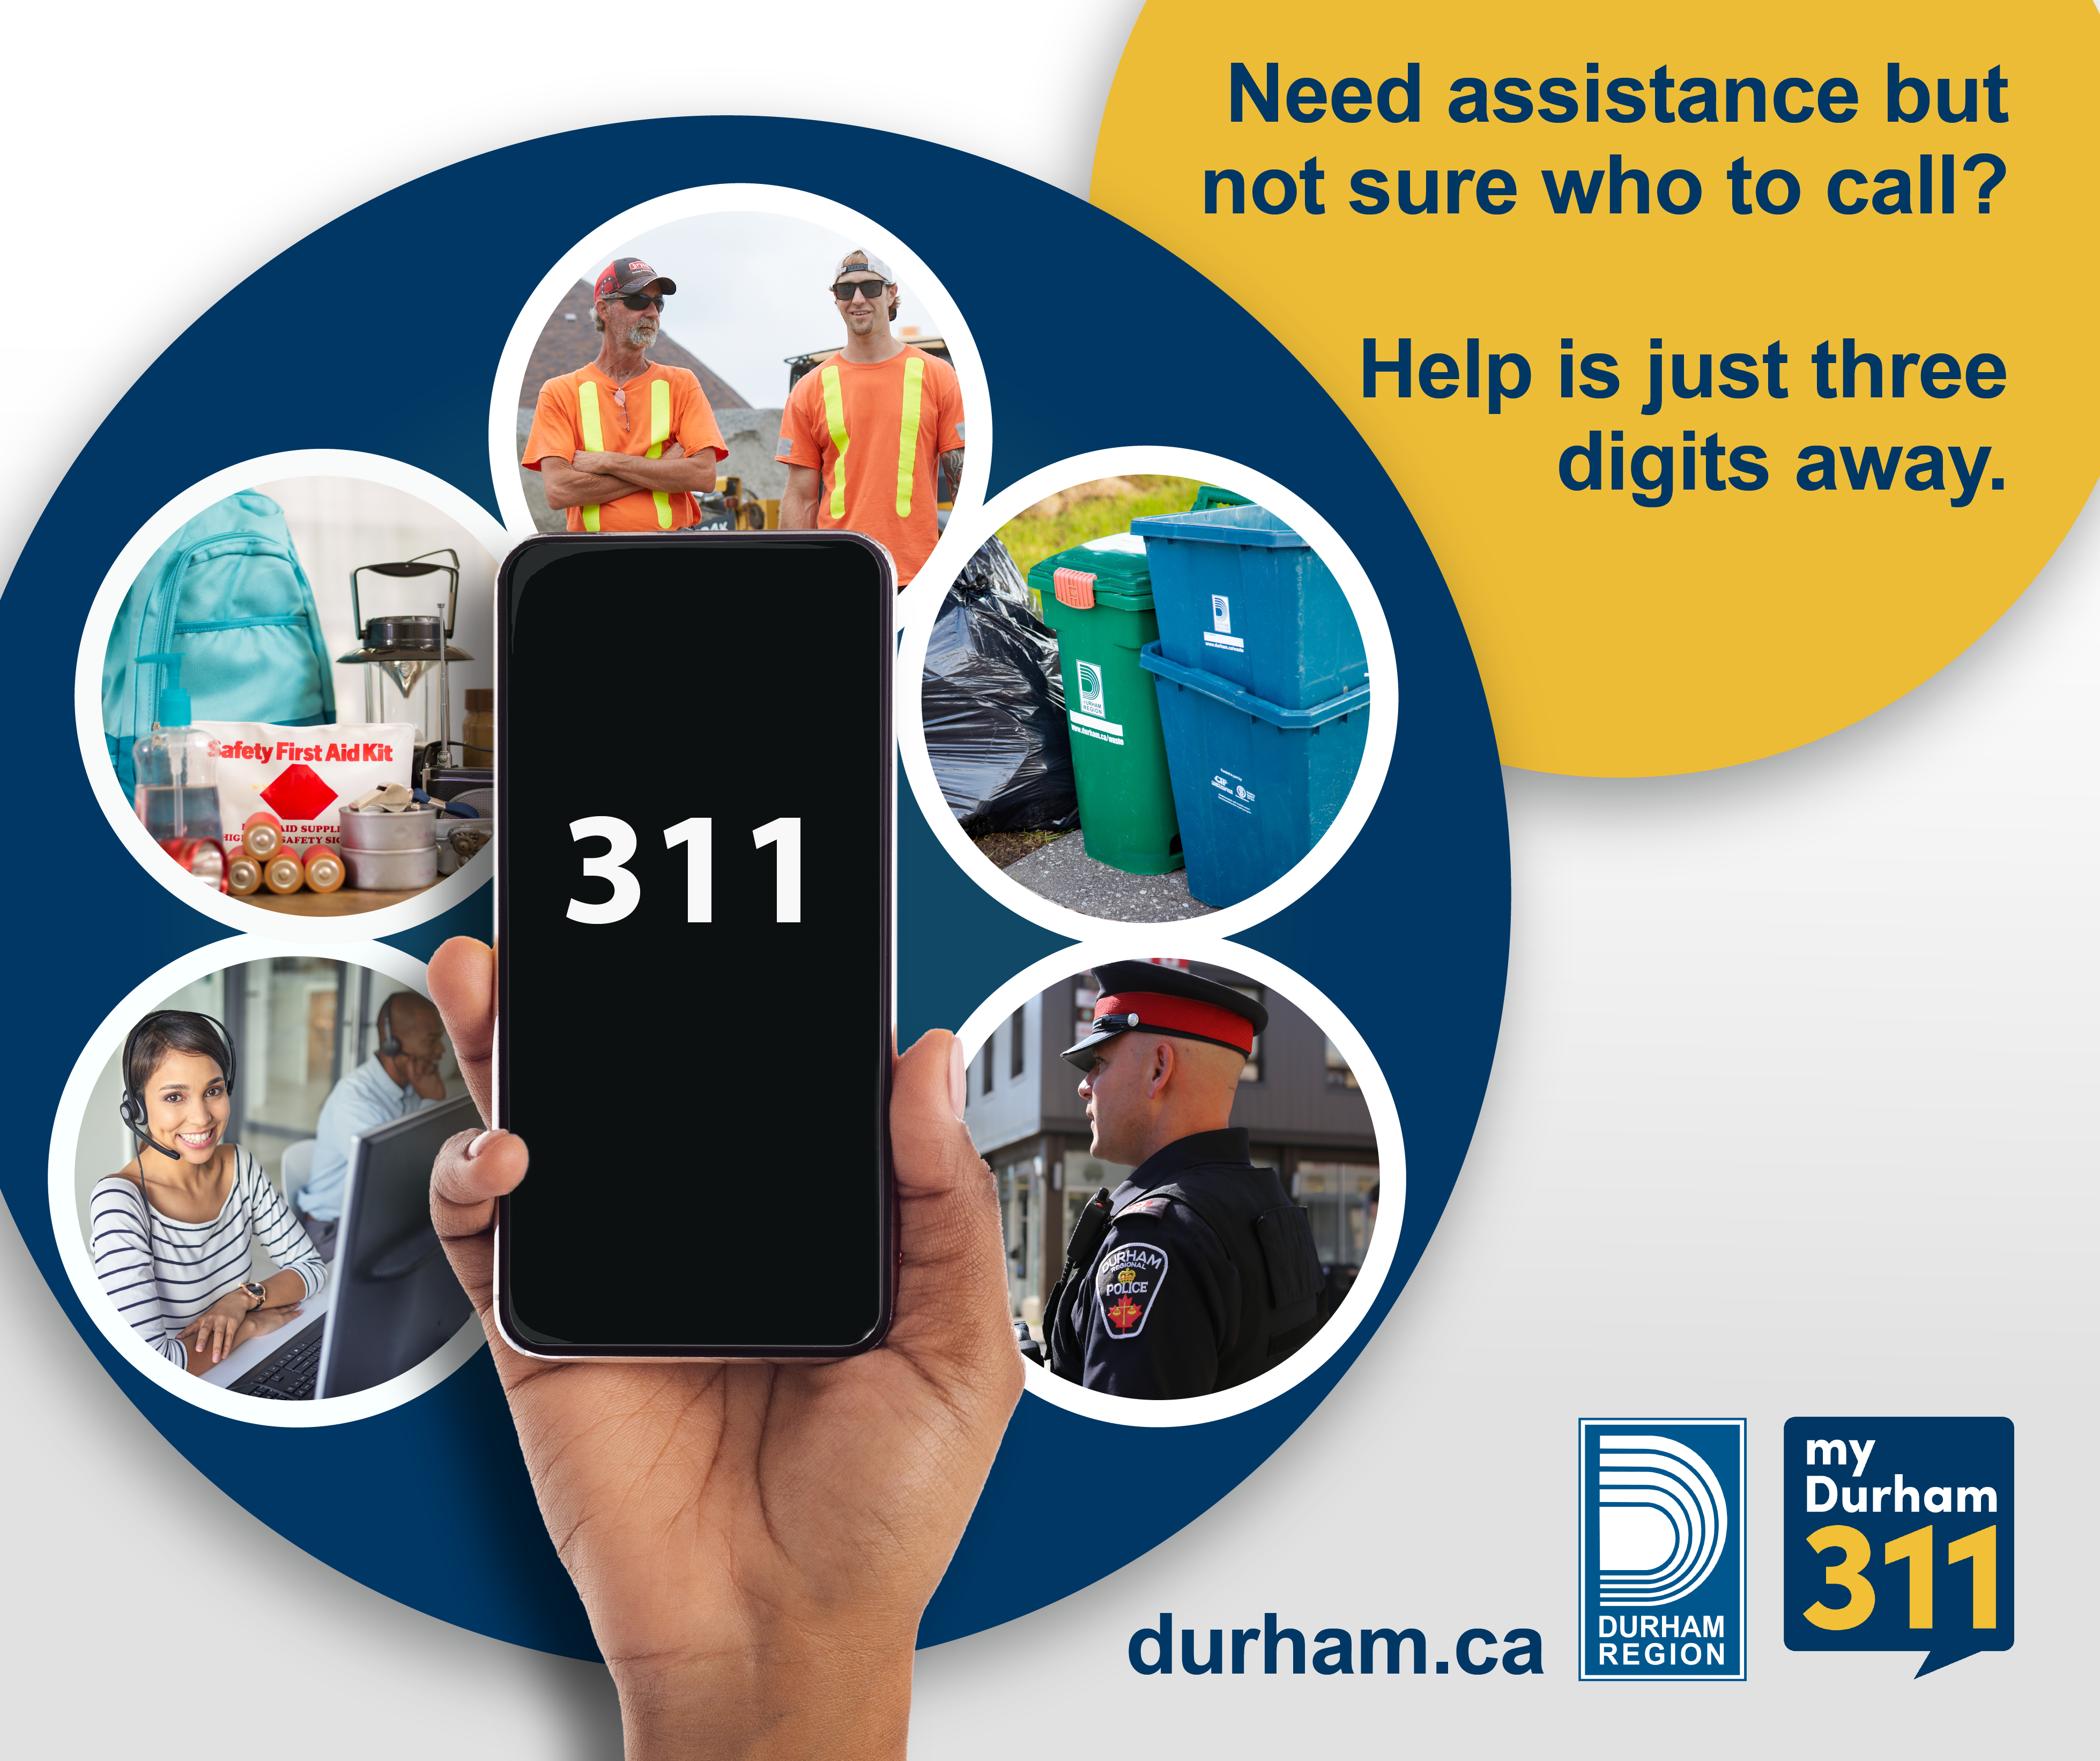 A graphic showing a hand holding a cell phone with 311 and photos of various Regional services in bubbles behind the hand. A yellow text bubble reads Need assistance but not sure who to call? Help is just three digits away. The bottom banner has text reading durham.ca, as well as the logos for Durham Region and myDurham 311 